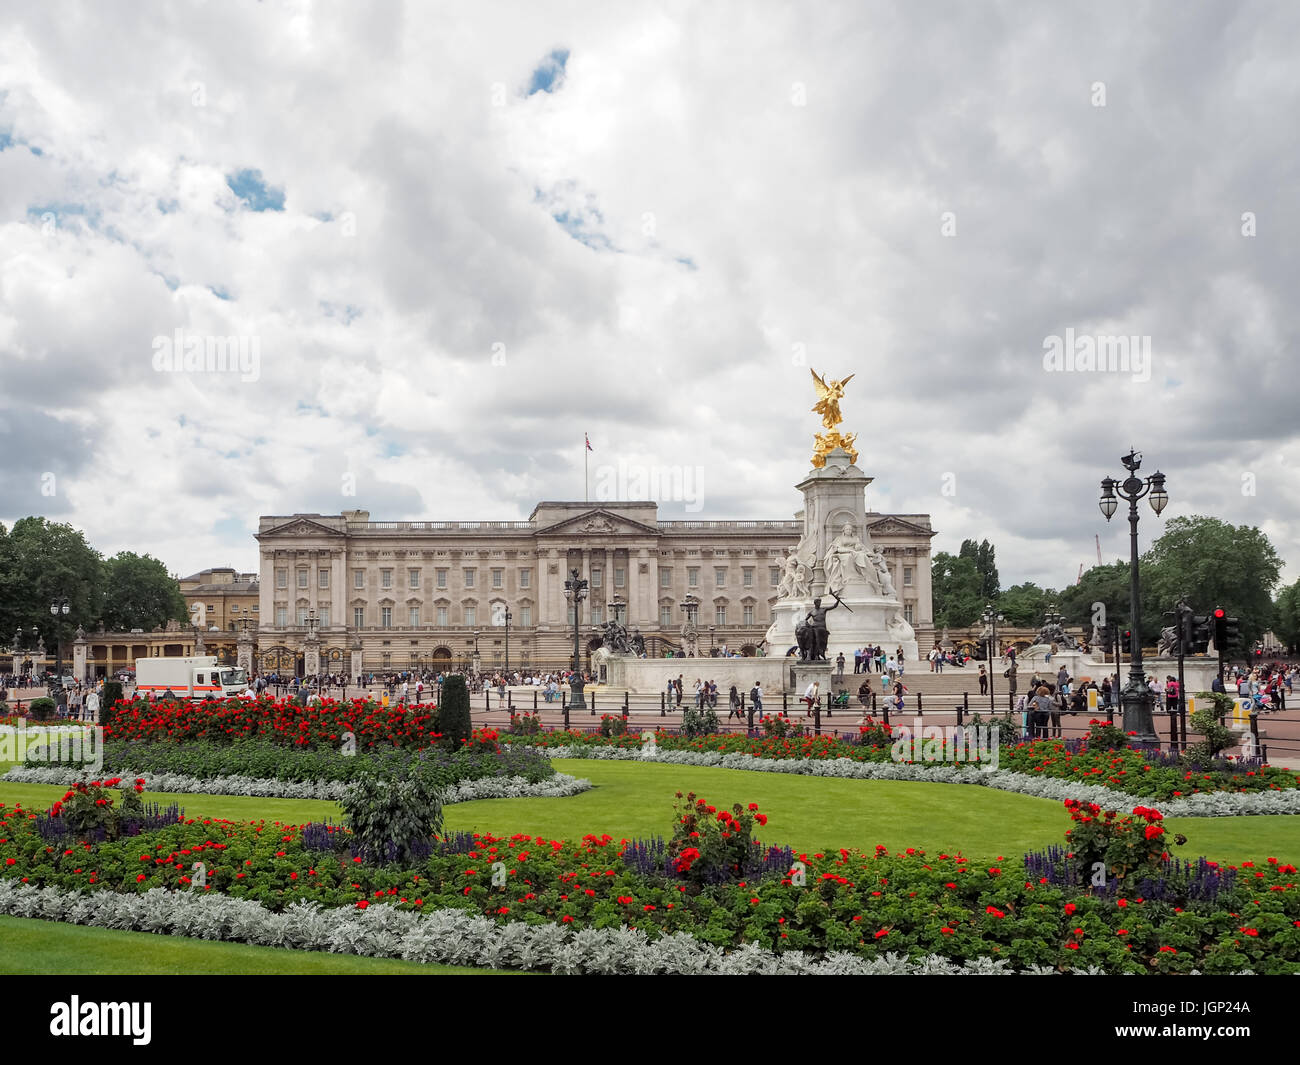 Buckingham Palace and Victoria Memorial, the home of the Queen of England, London, summer 2016 Stock Photo